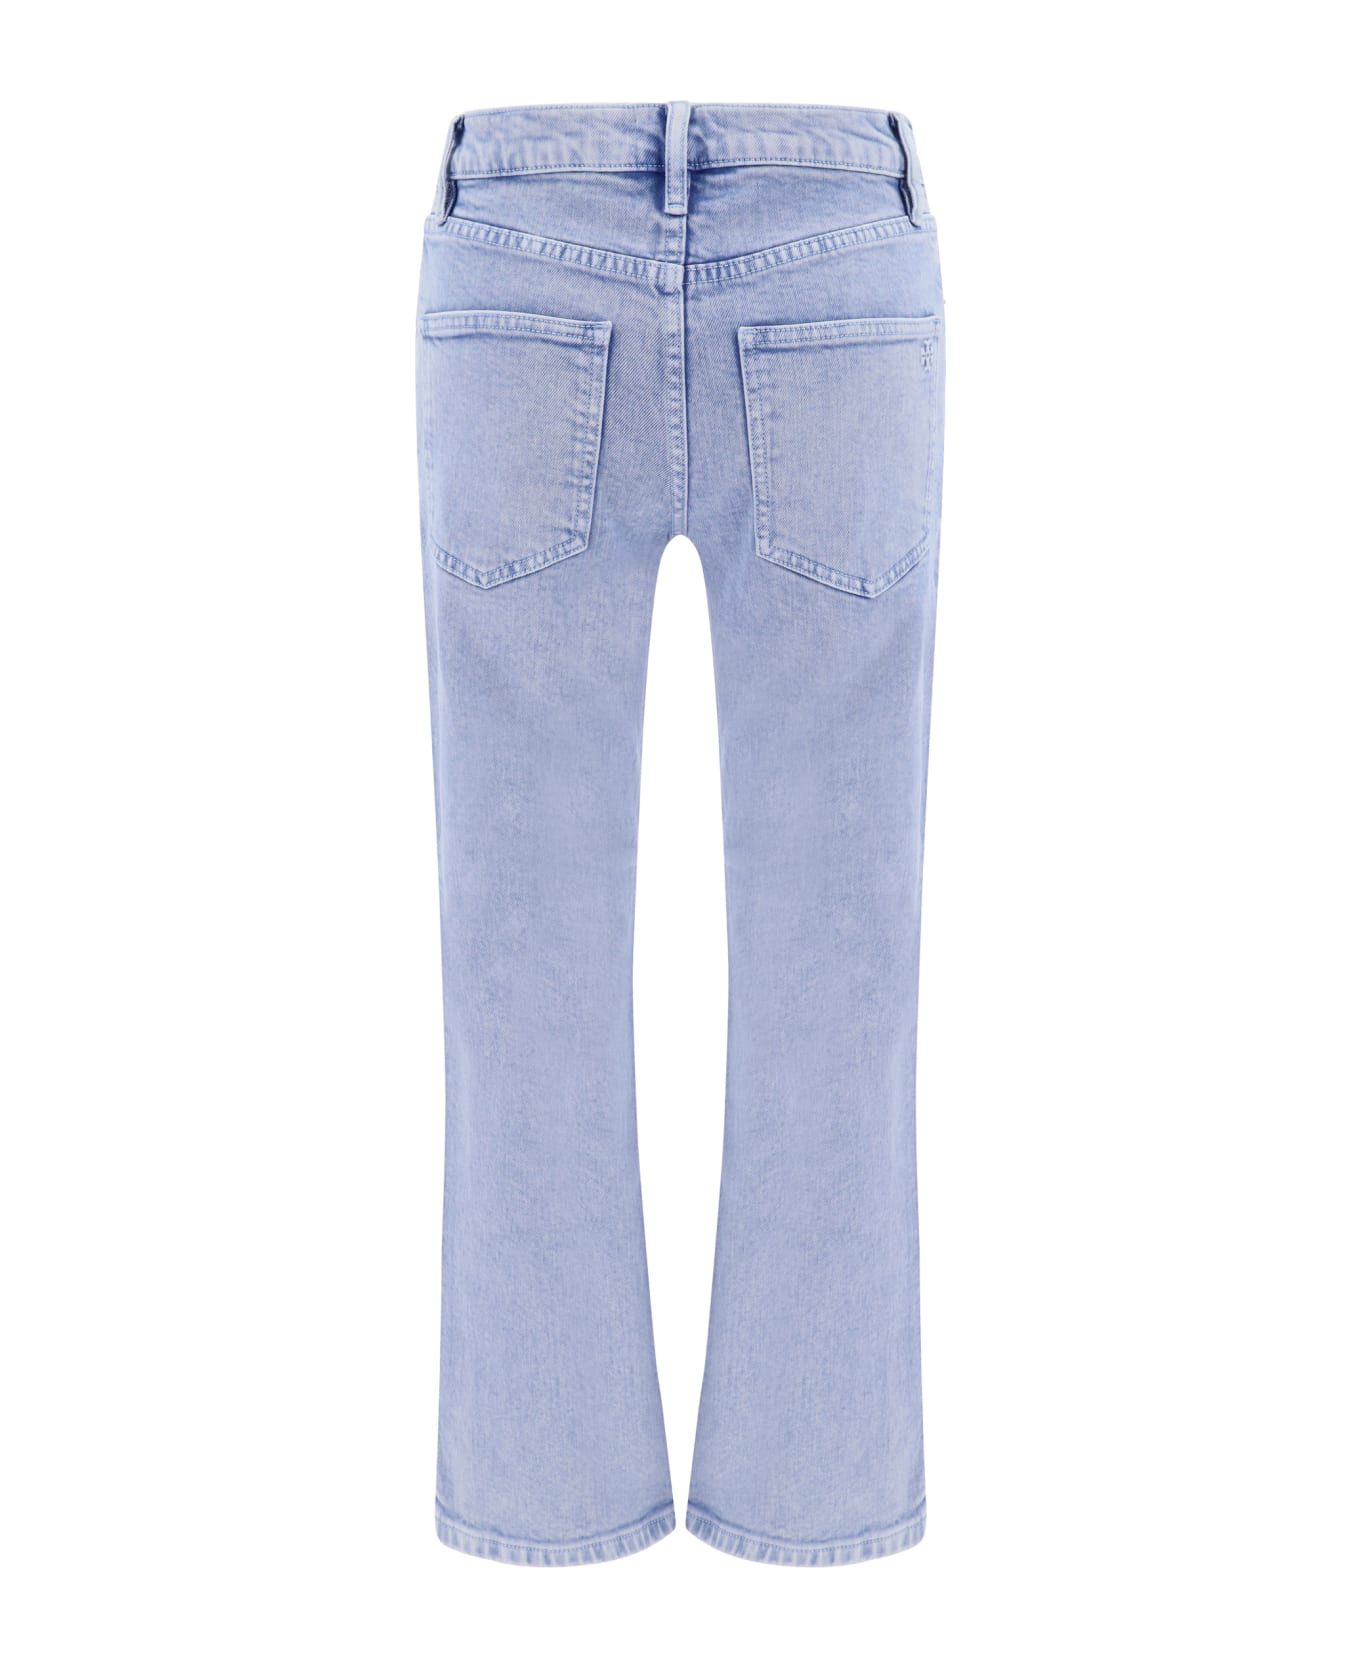 Tory Burch Jeans - Ice Blue